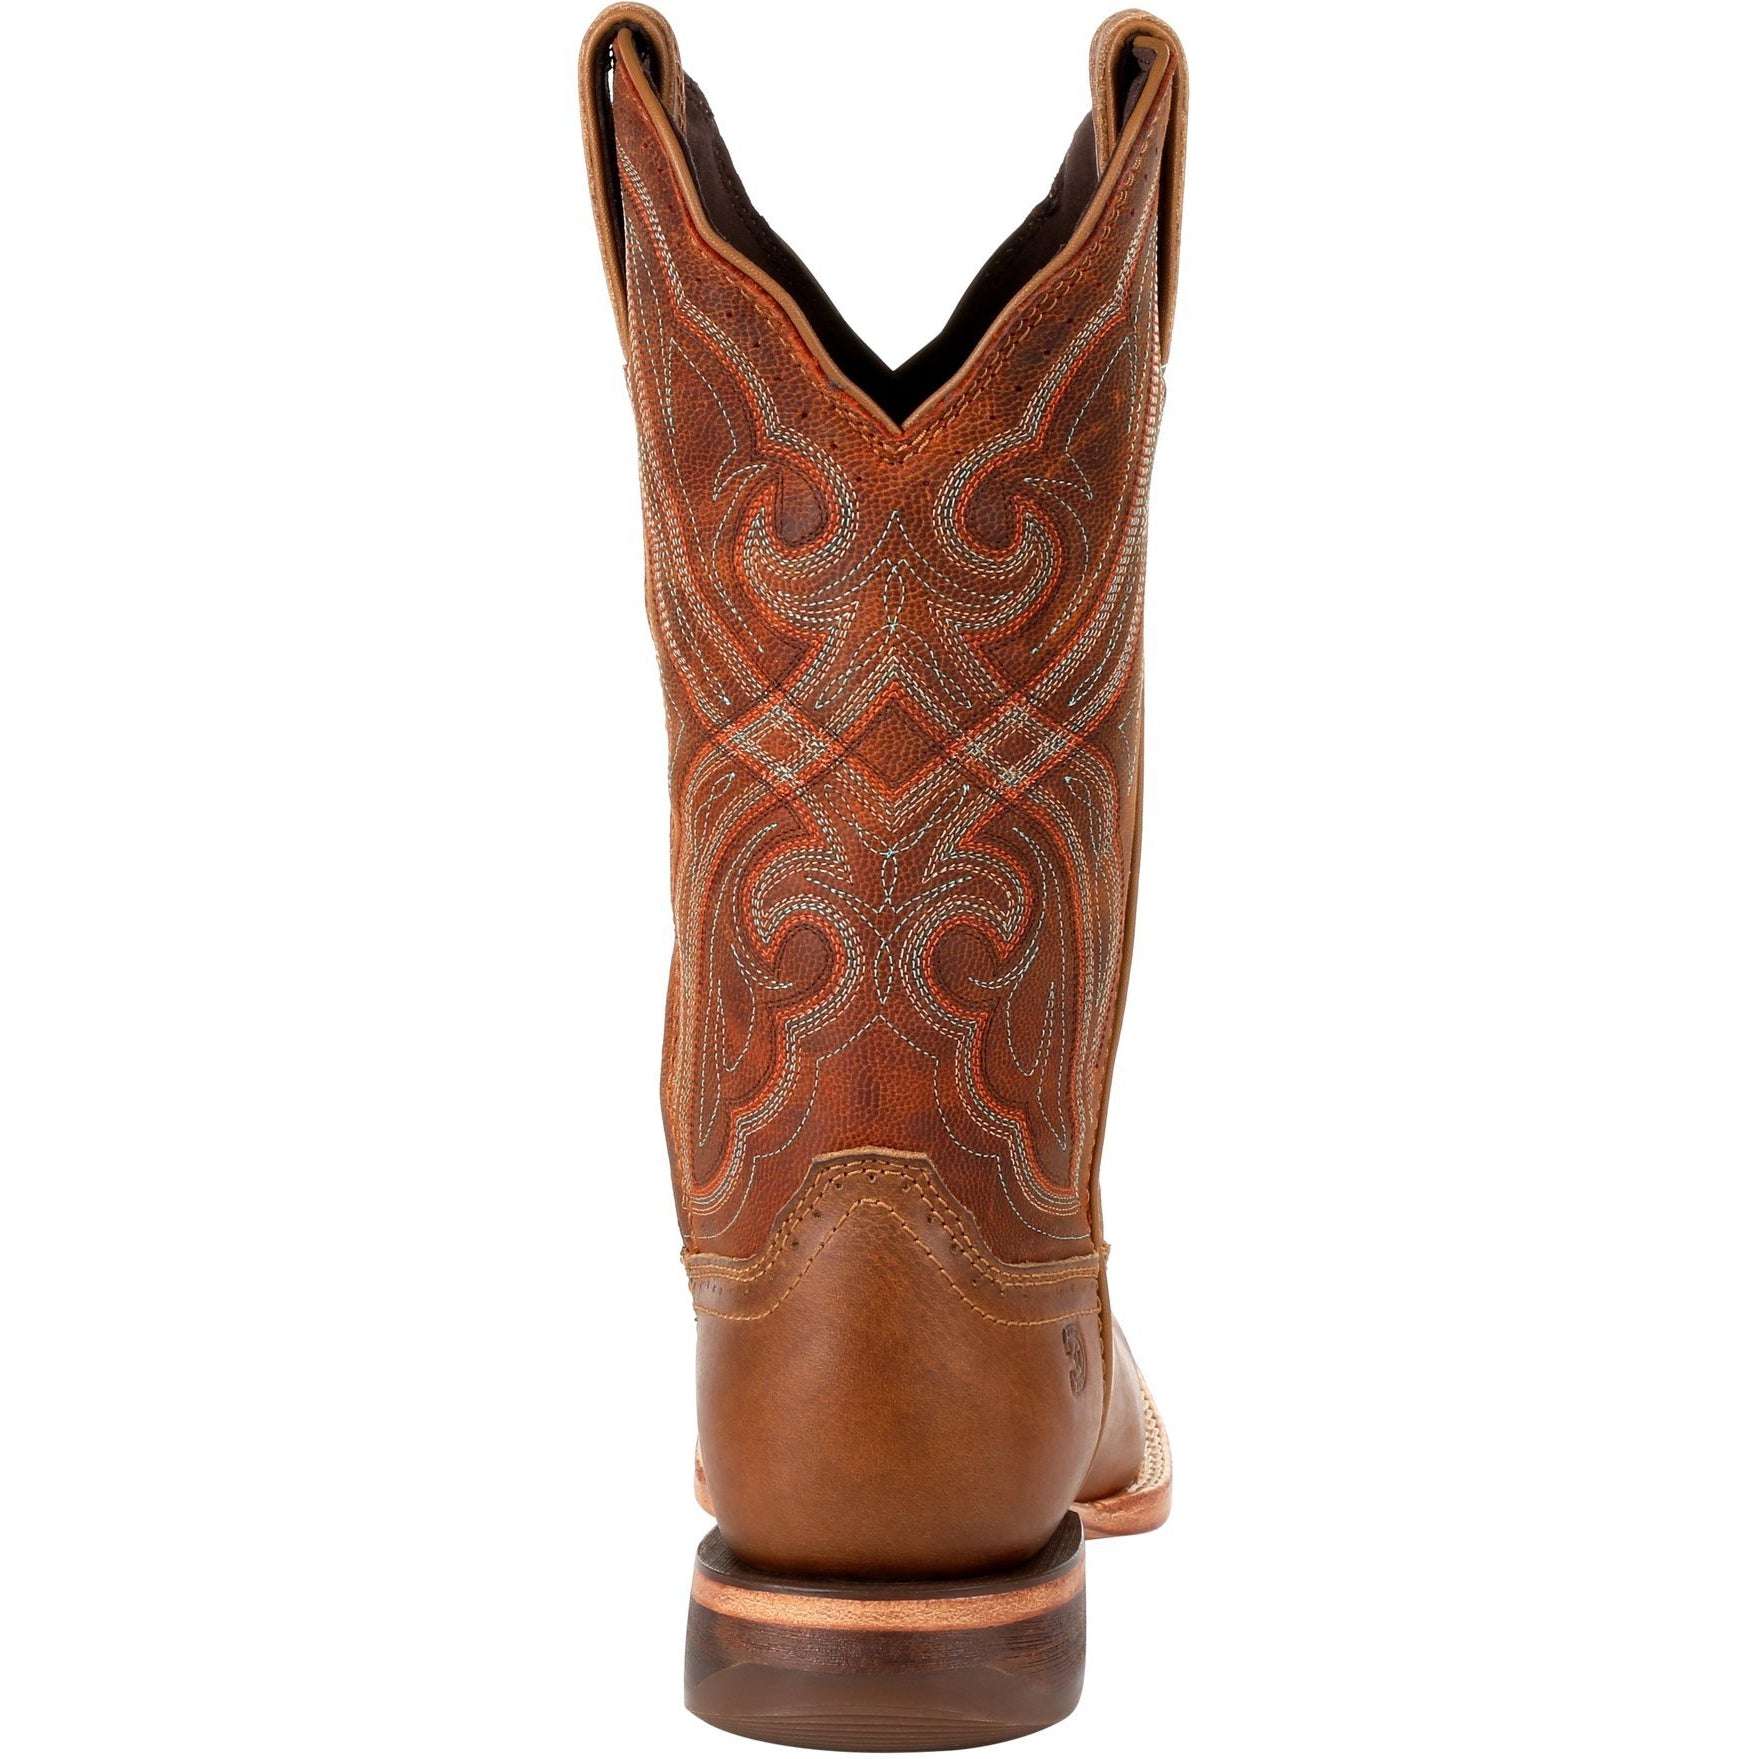 Durango Women's Arena Pro 12" Square Toe Western Boot Chestnut DRD0380  - Overlook Boots